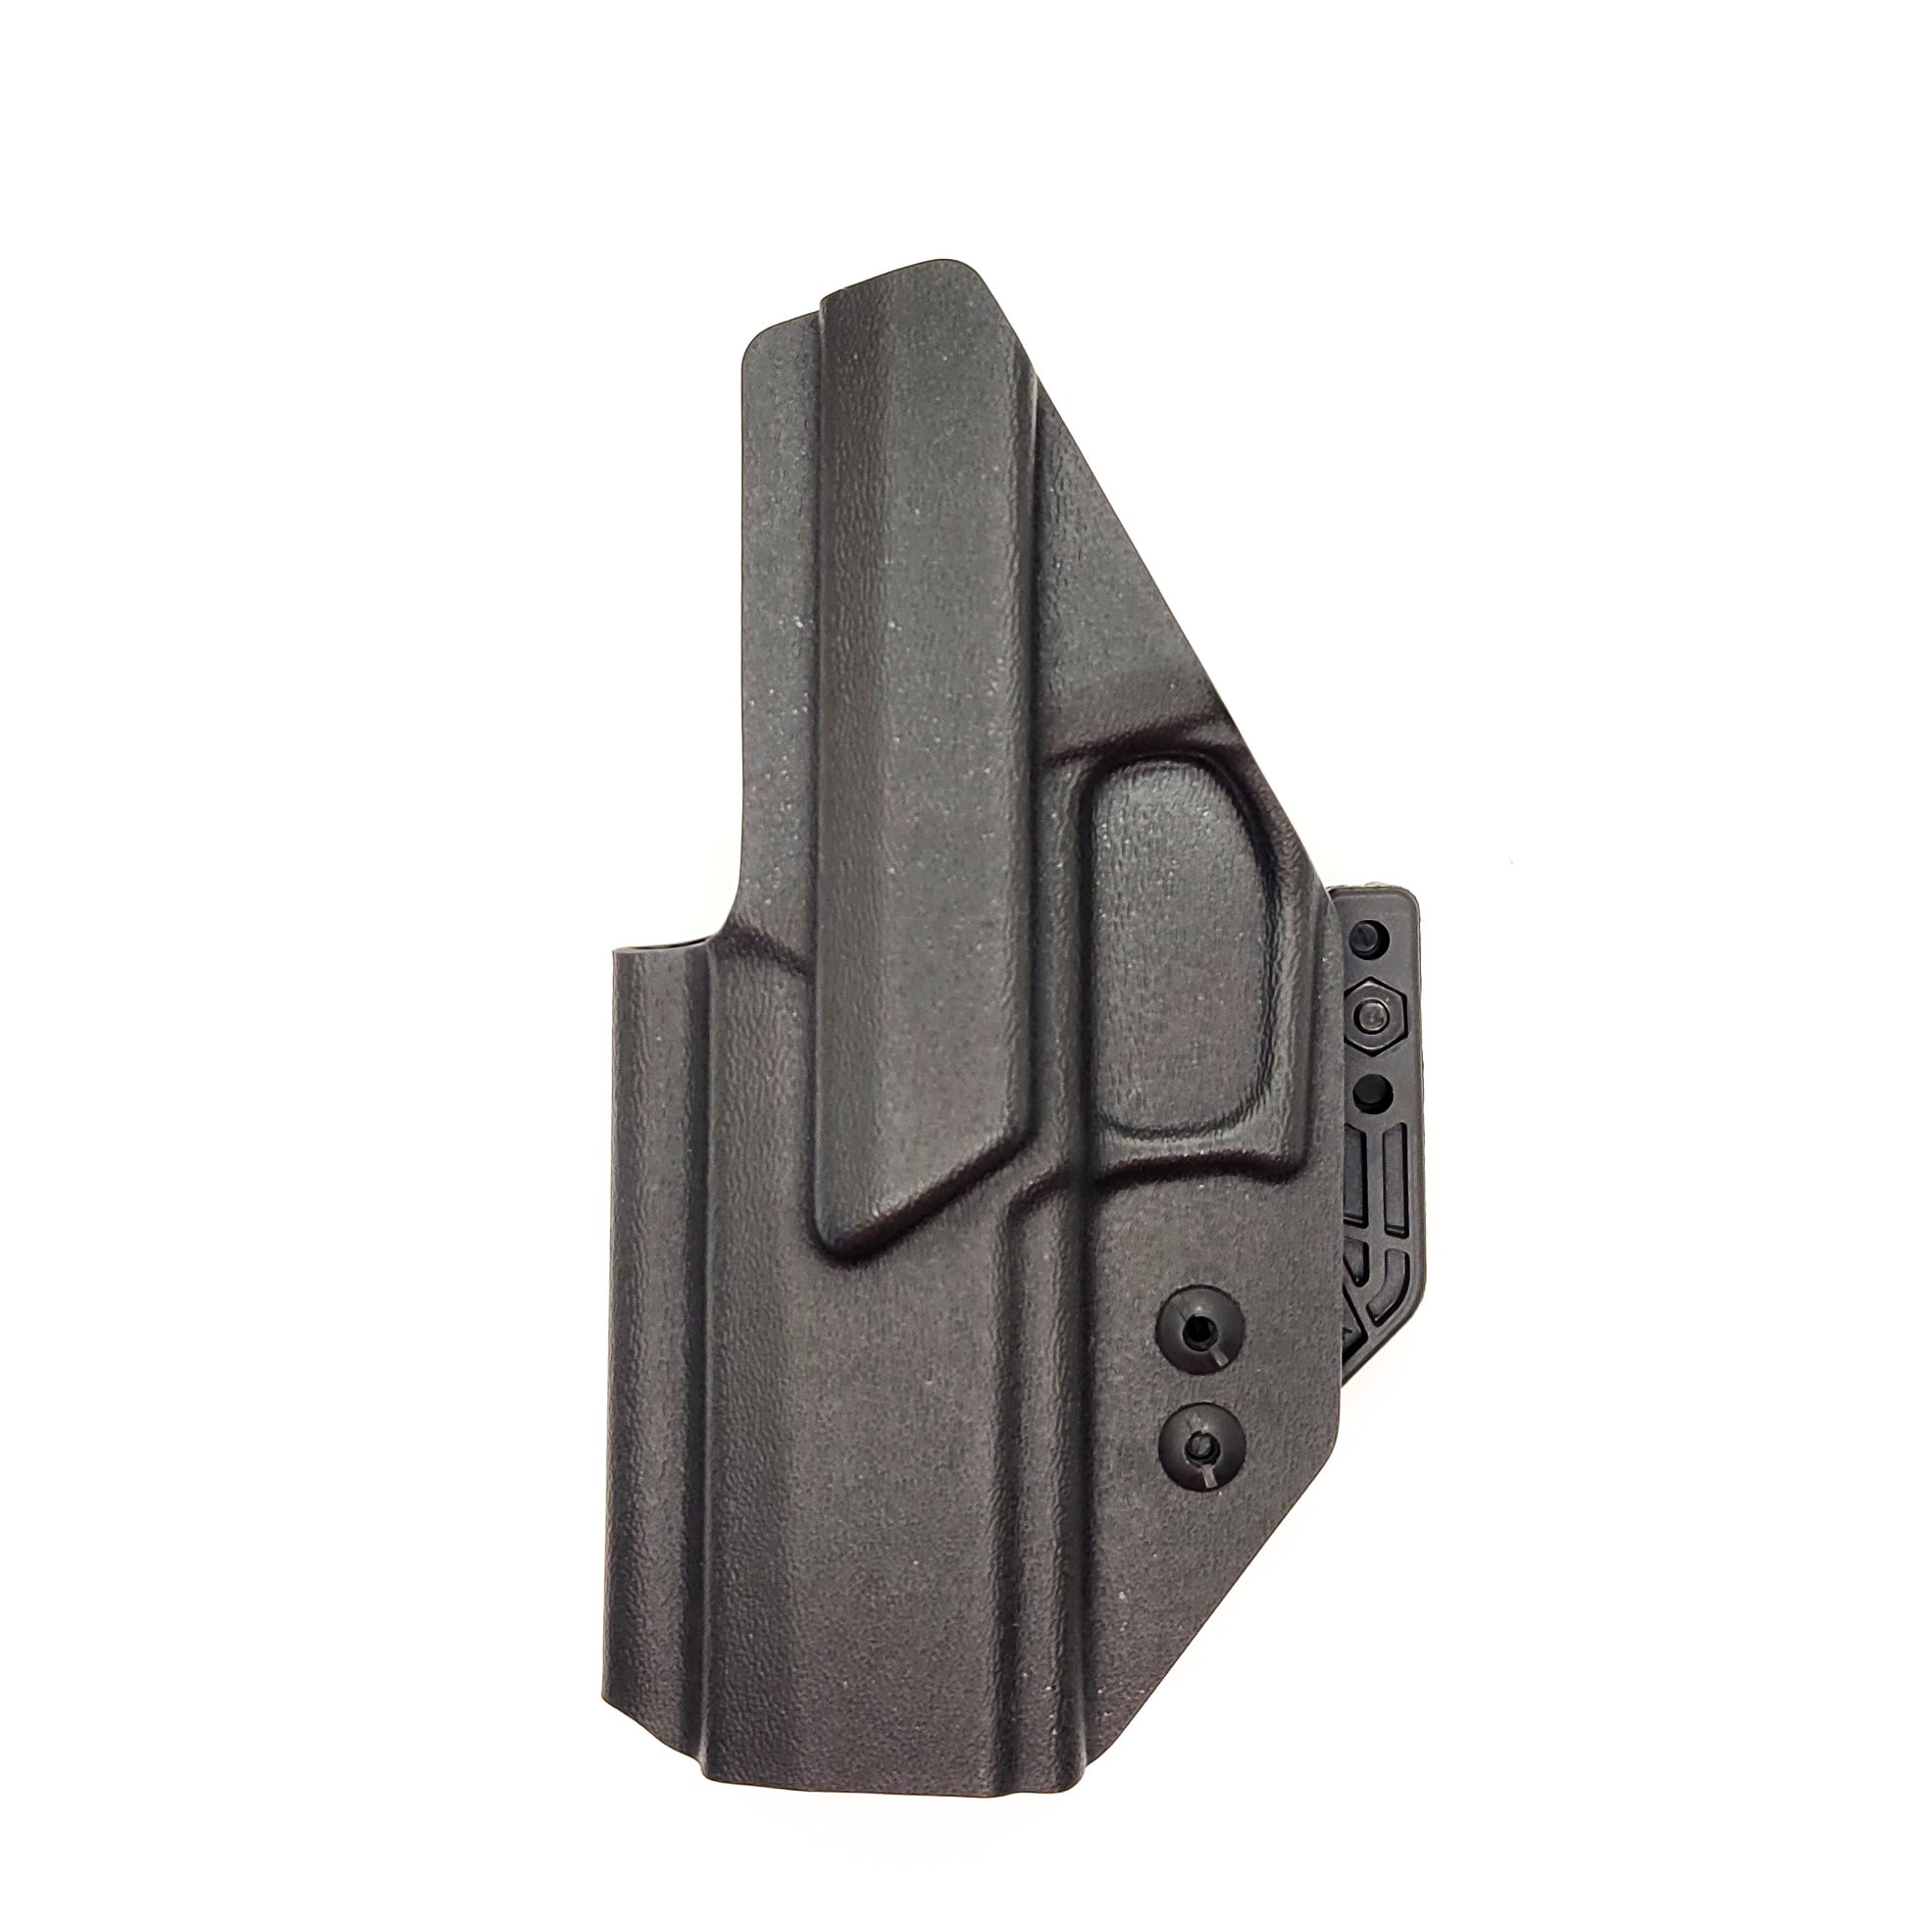 Inside Waistband Holster designed to fit all P320 Carry pistols, including the M18 with the Align Tactical Thumb Rest. This holster will also fit the P320 Wilson Combat Carry grip module. The holster will work with or without the Align Tactical Thumb Rest Takedown Lever installed on the pistol.